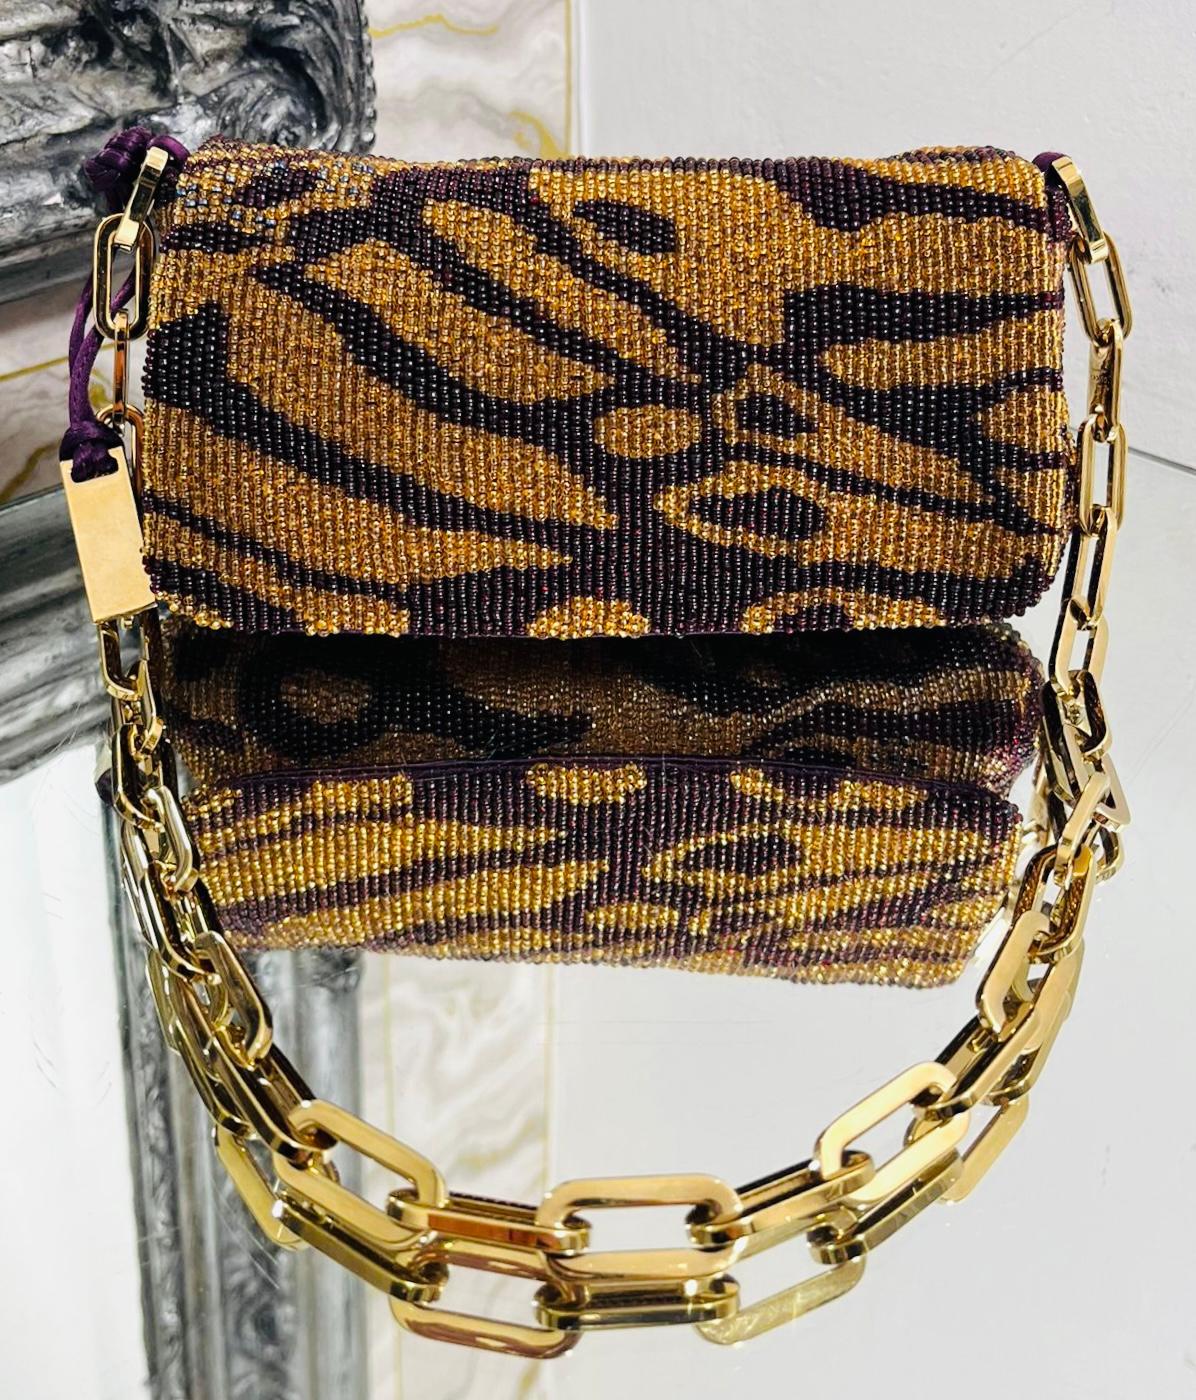 Gucci By Tom Ford Beaded Evening Bag

Very rear is this dark gold and purple bag designed with tiger inspired sparkling beaded pattern throughout.

Detailed with gold chain-link shoulder strap and front flap leading to purple silk lined